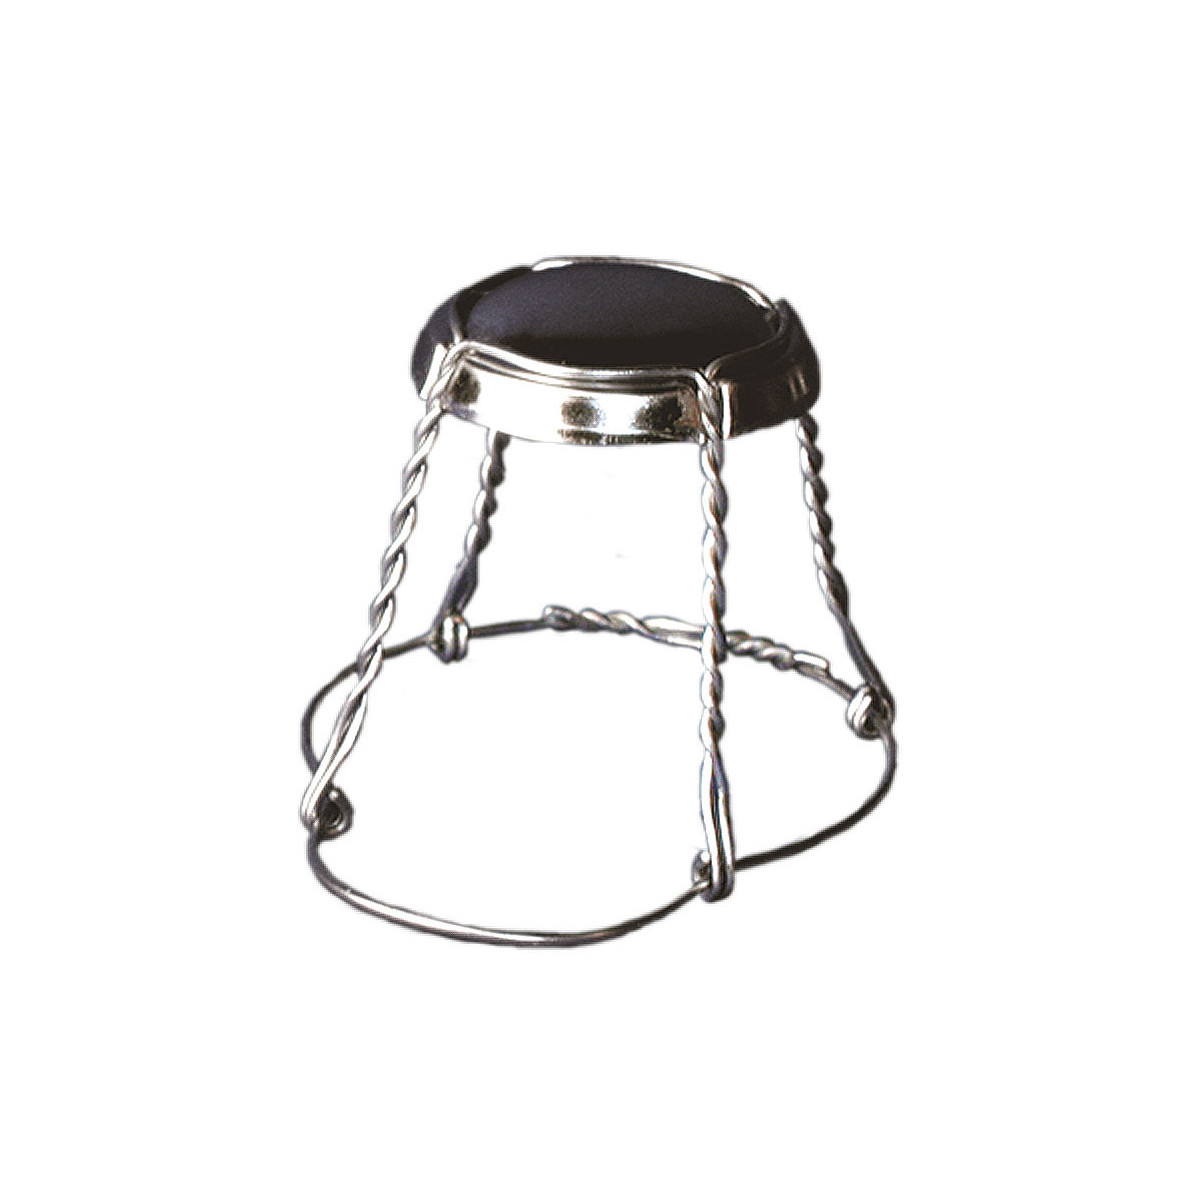 Champagne cage + cap black for beercork 2,700 pcs